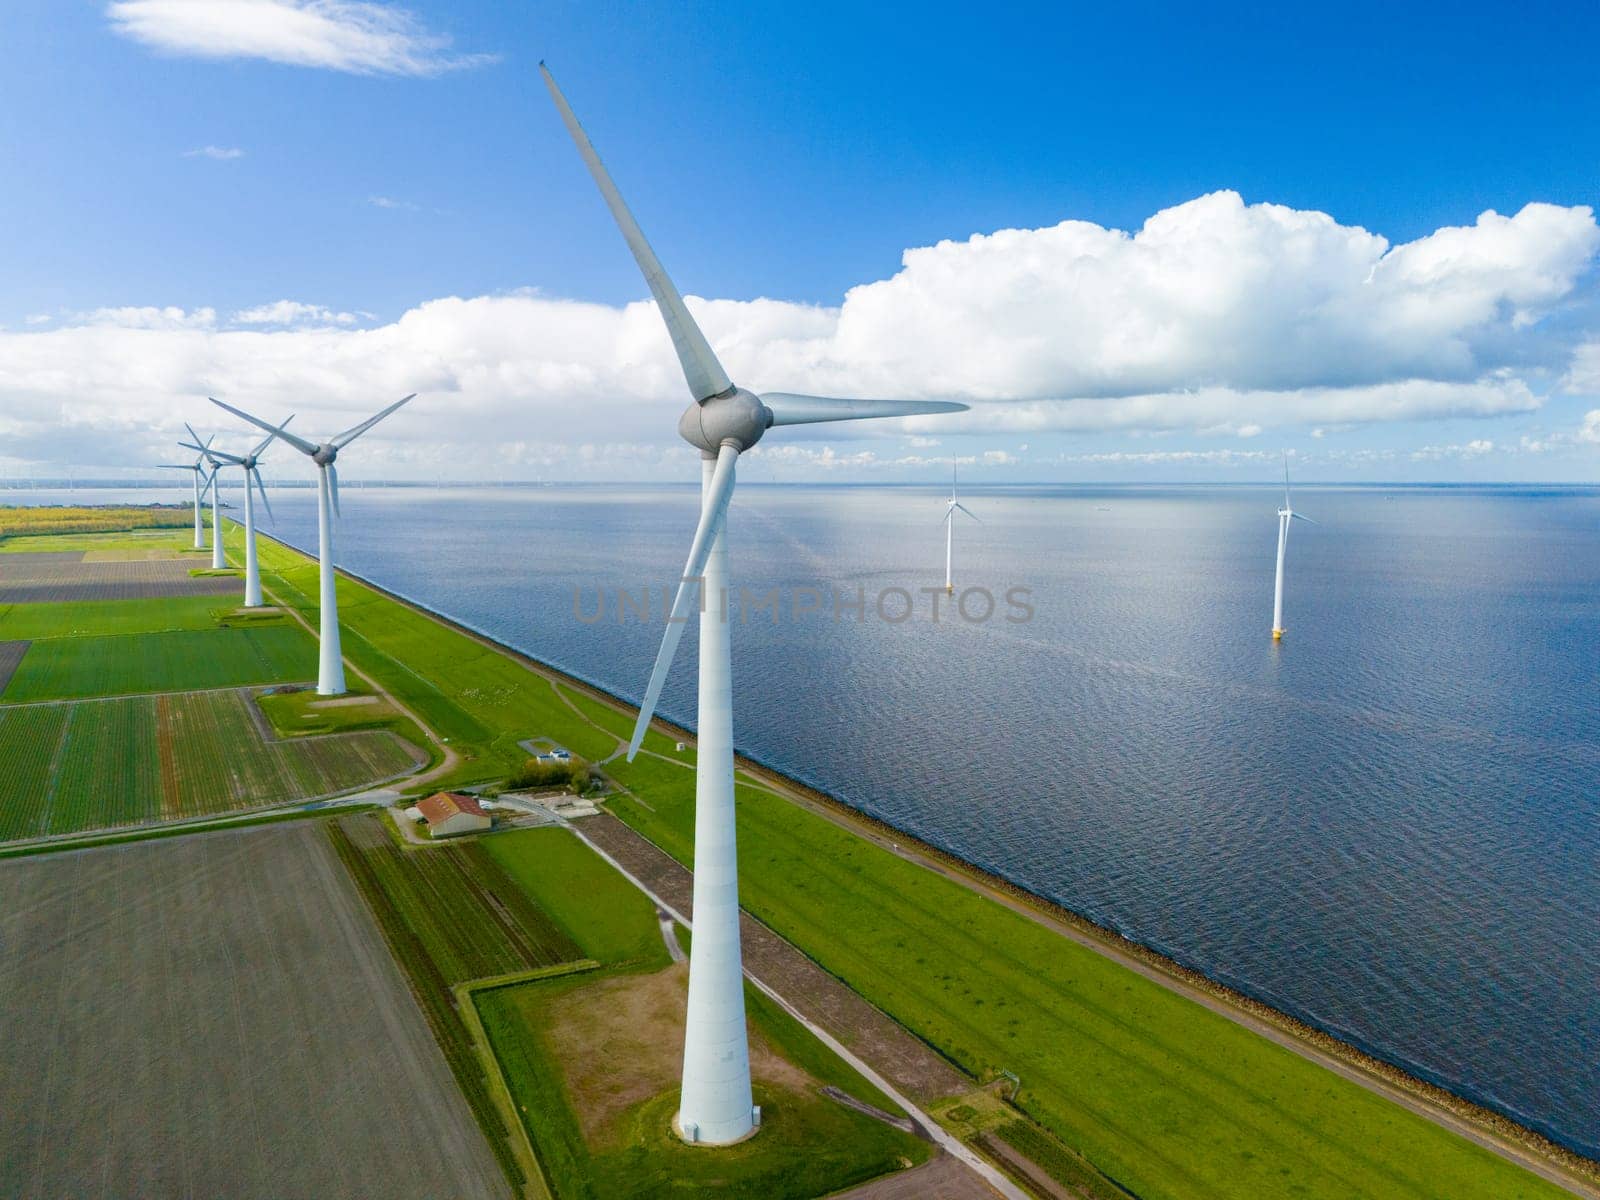 Serene wind farm with sleek turbines dancing gracefully near the ocean in the Netherlands on a clear Spring day.